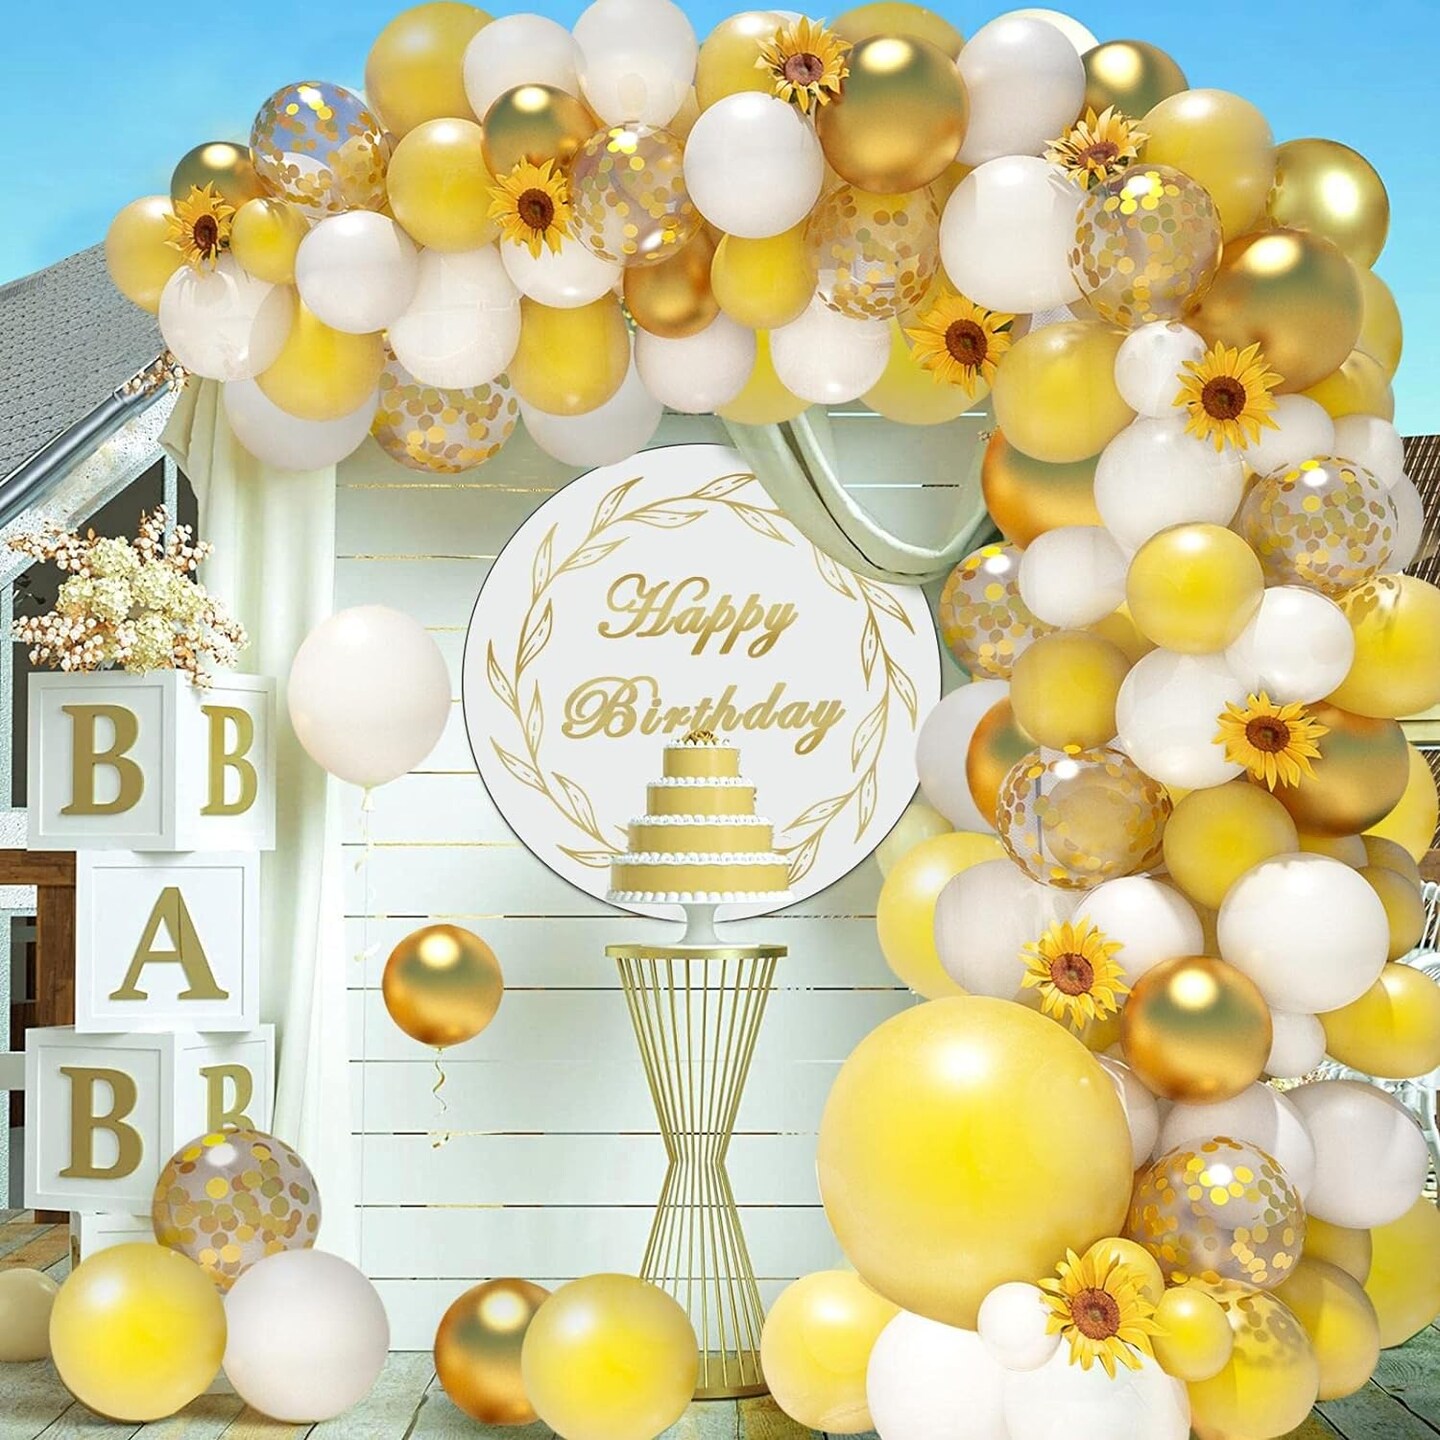 18Inch Sunflower Yellow Gold White Balloons Balloon Garland Arch Kit, Sunflower Bee Theme Birthday Baby Shower Wedding Party Decorations for Girl Boy